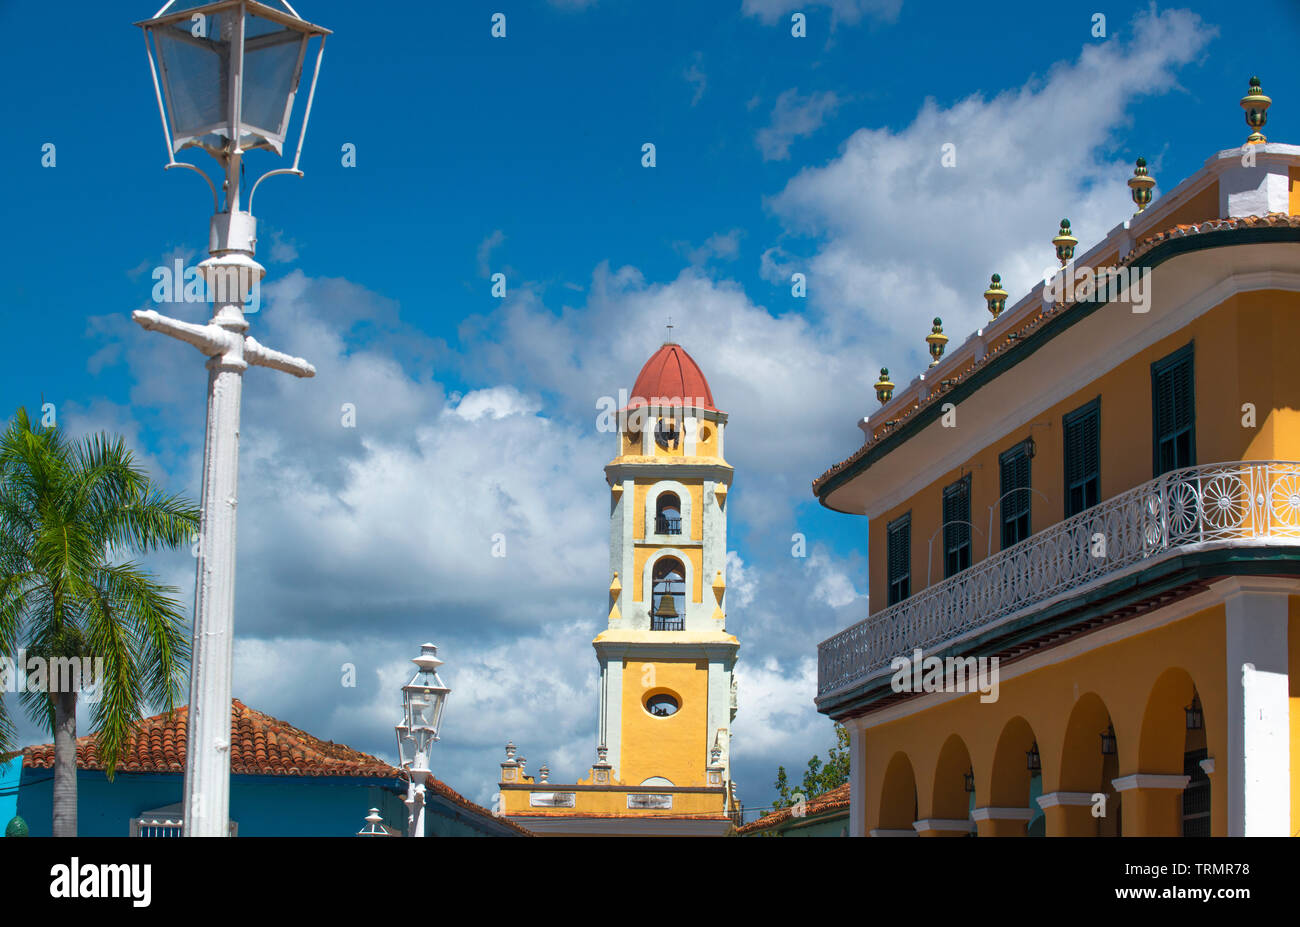 Trinidad, Cuba, with view of Palacio Brunet (Museo Romantico) and the bell tower of the Iglesia de San Francisco Stock Photo